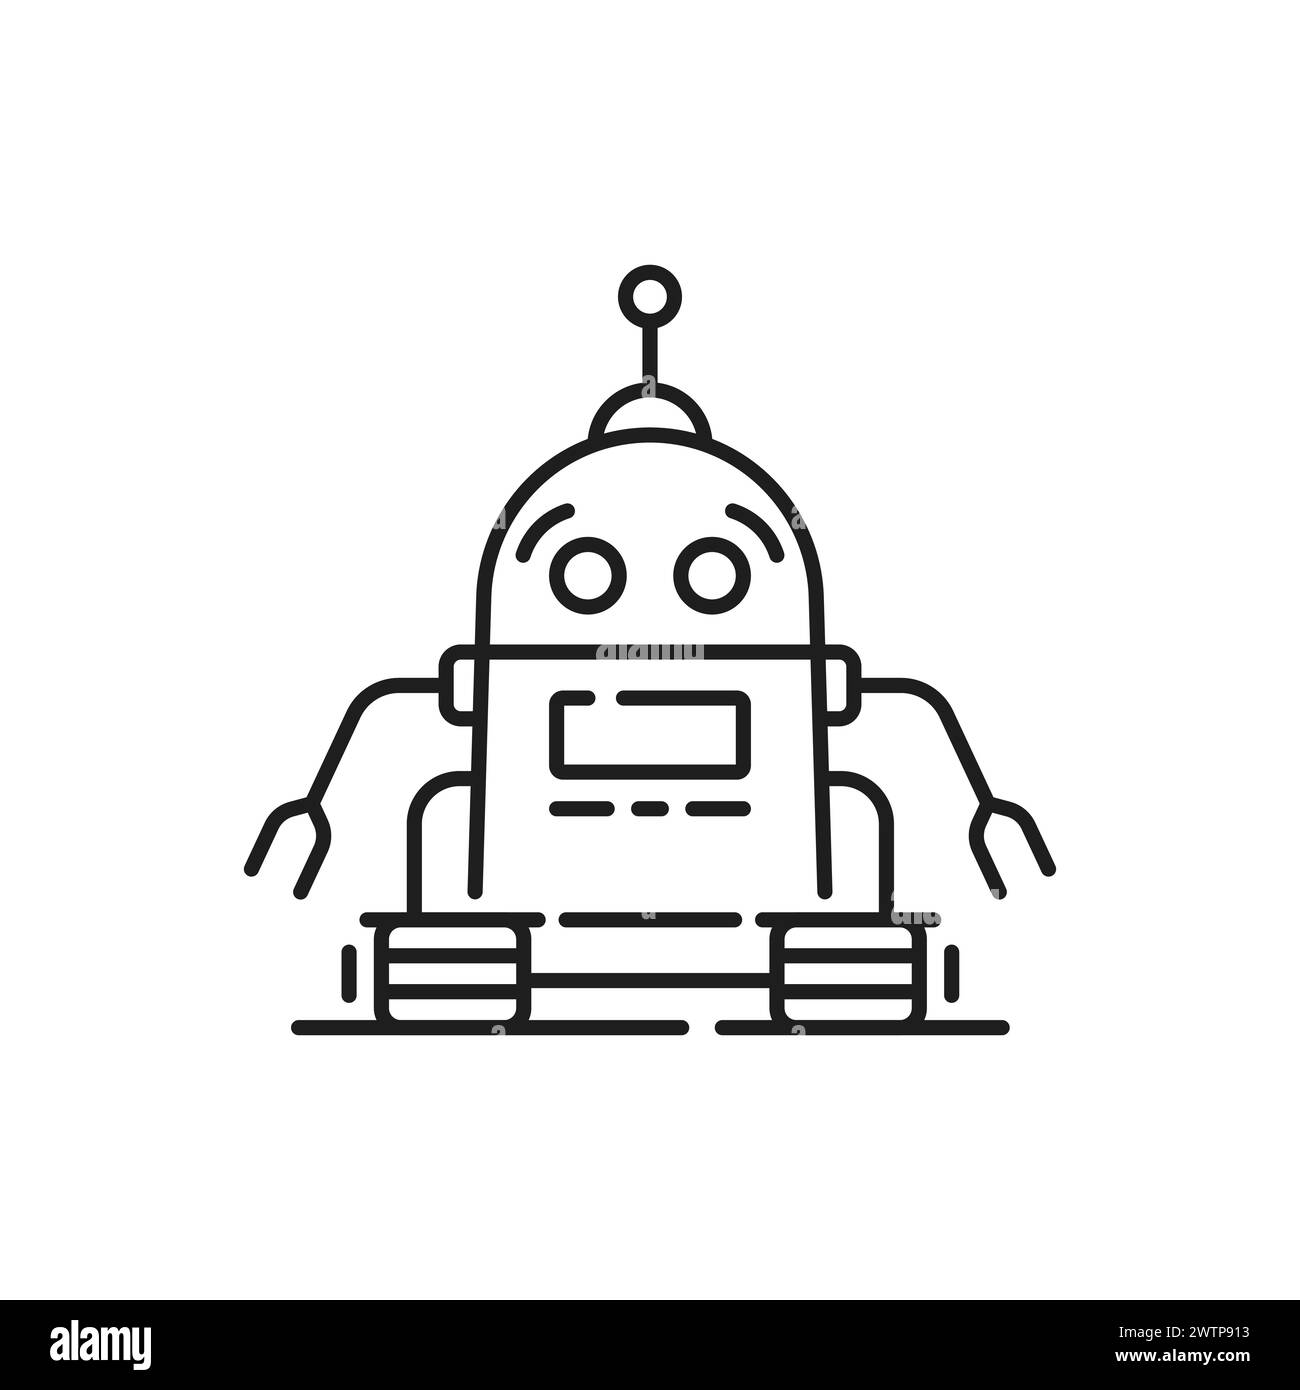 Sci Fi retro robot outline icon. Chatbot AI android, alien cyborg humanoid robot or virtual assistant vintage droid linear vector pictogram. Autopilot artificial intelligence bot outline icon Stock Vector